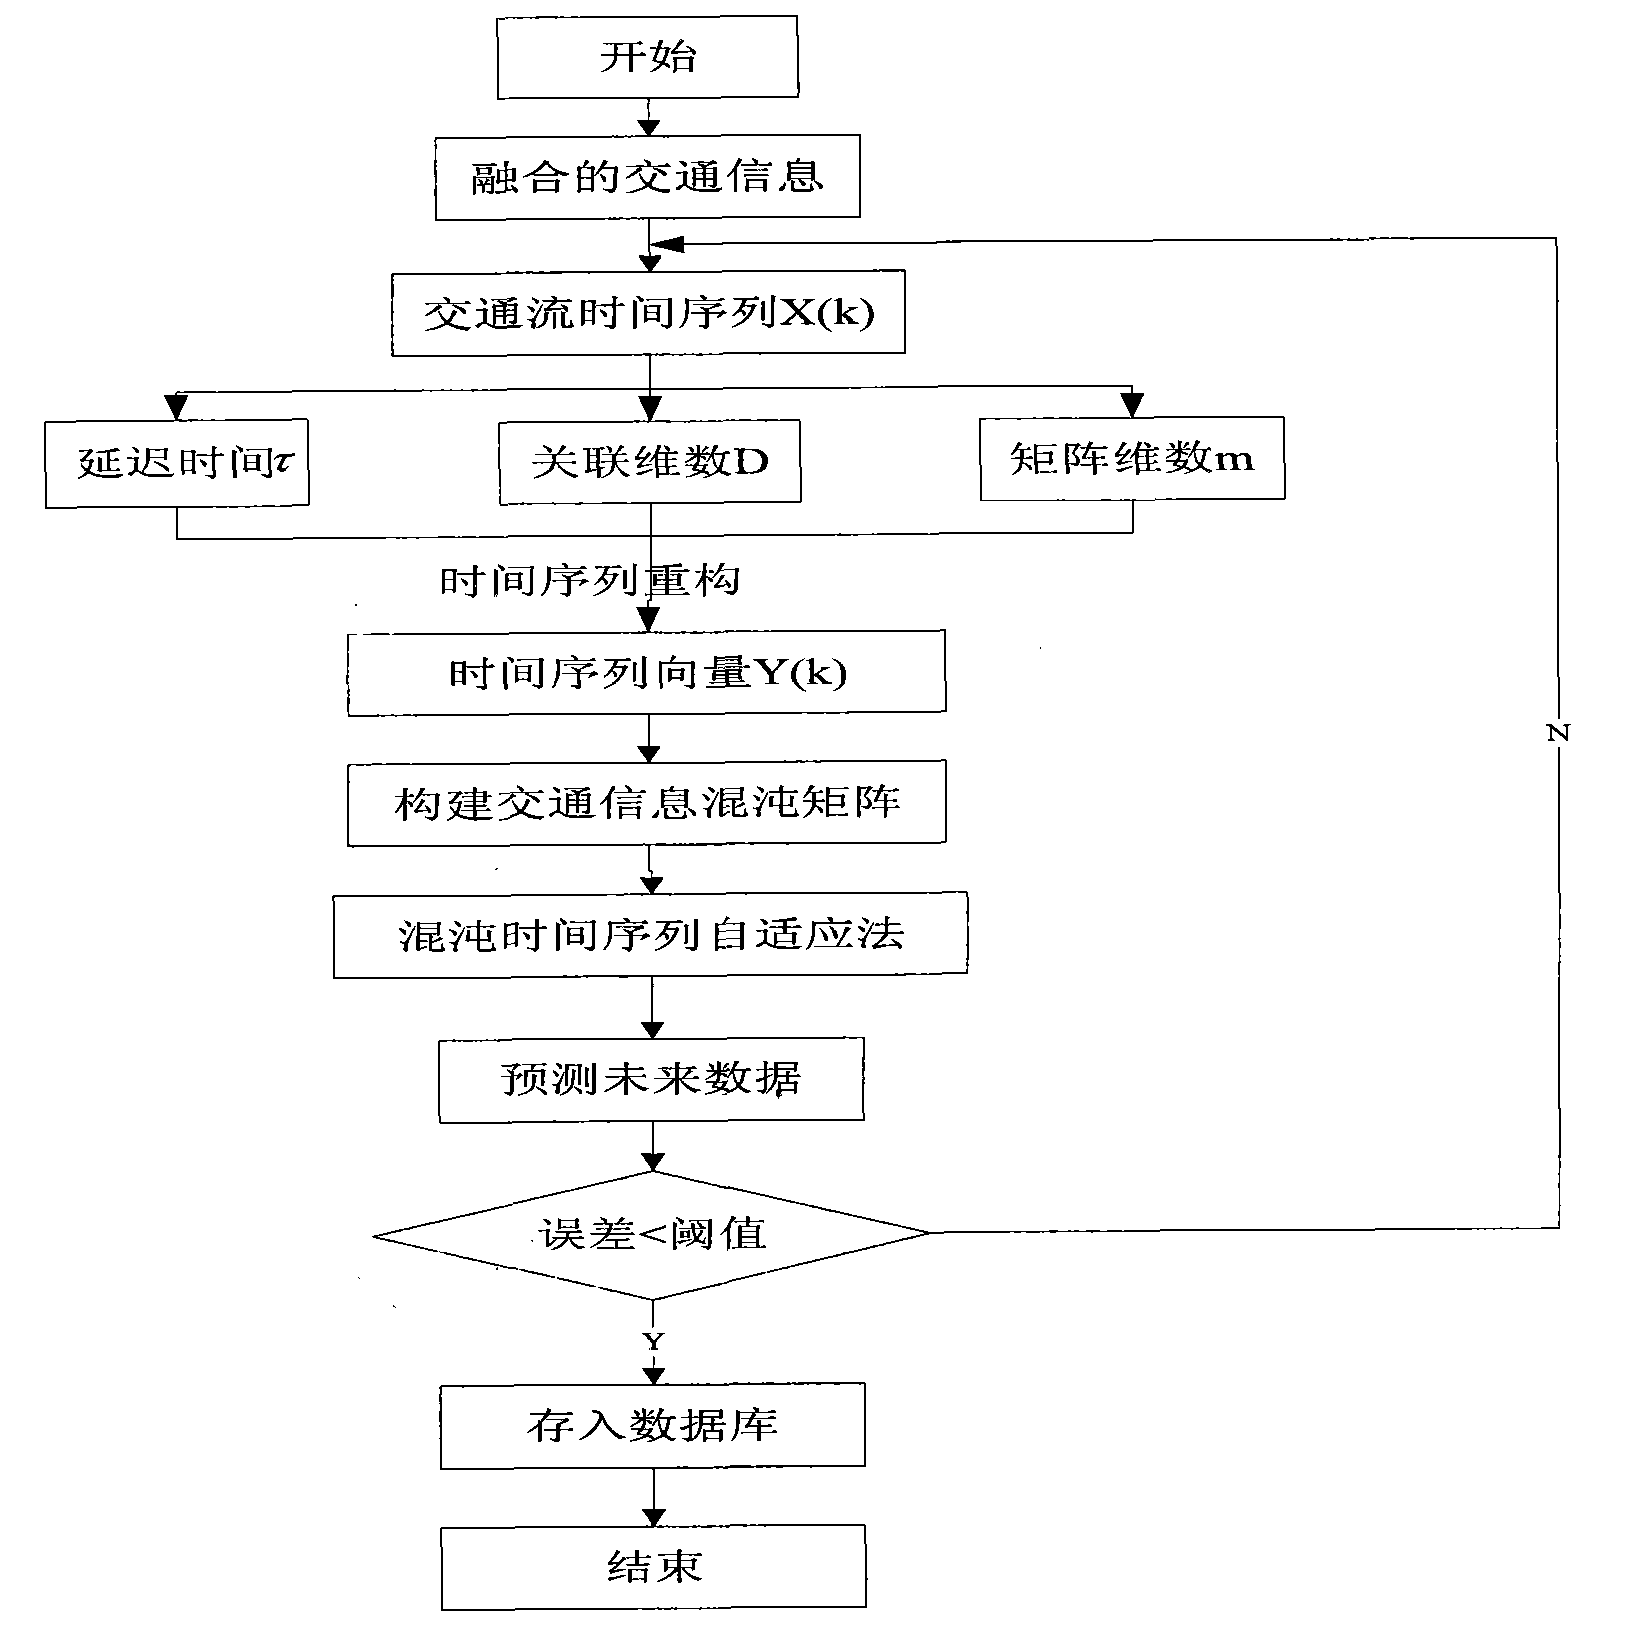 City expressway short-time traffic information predicting system and method